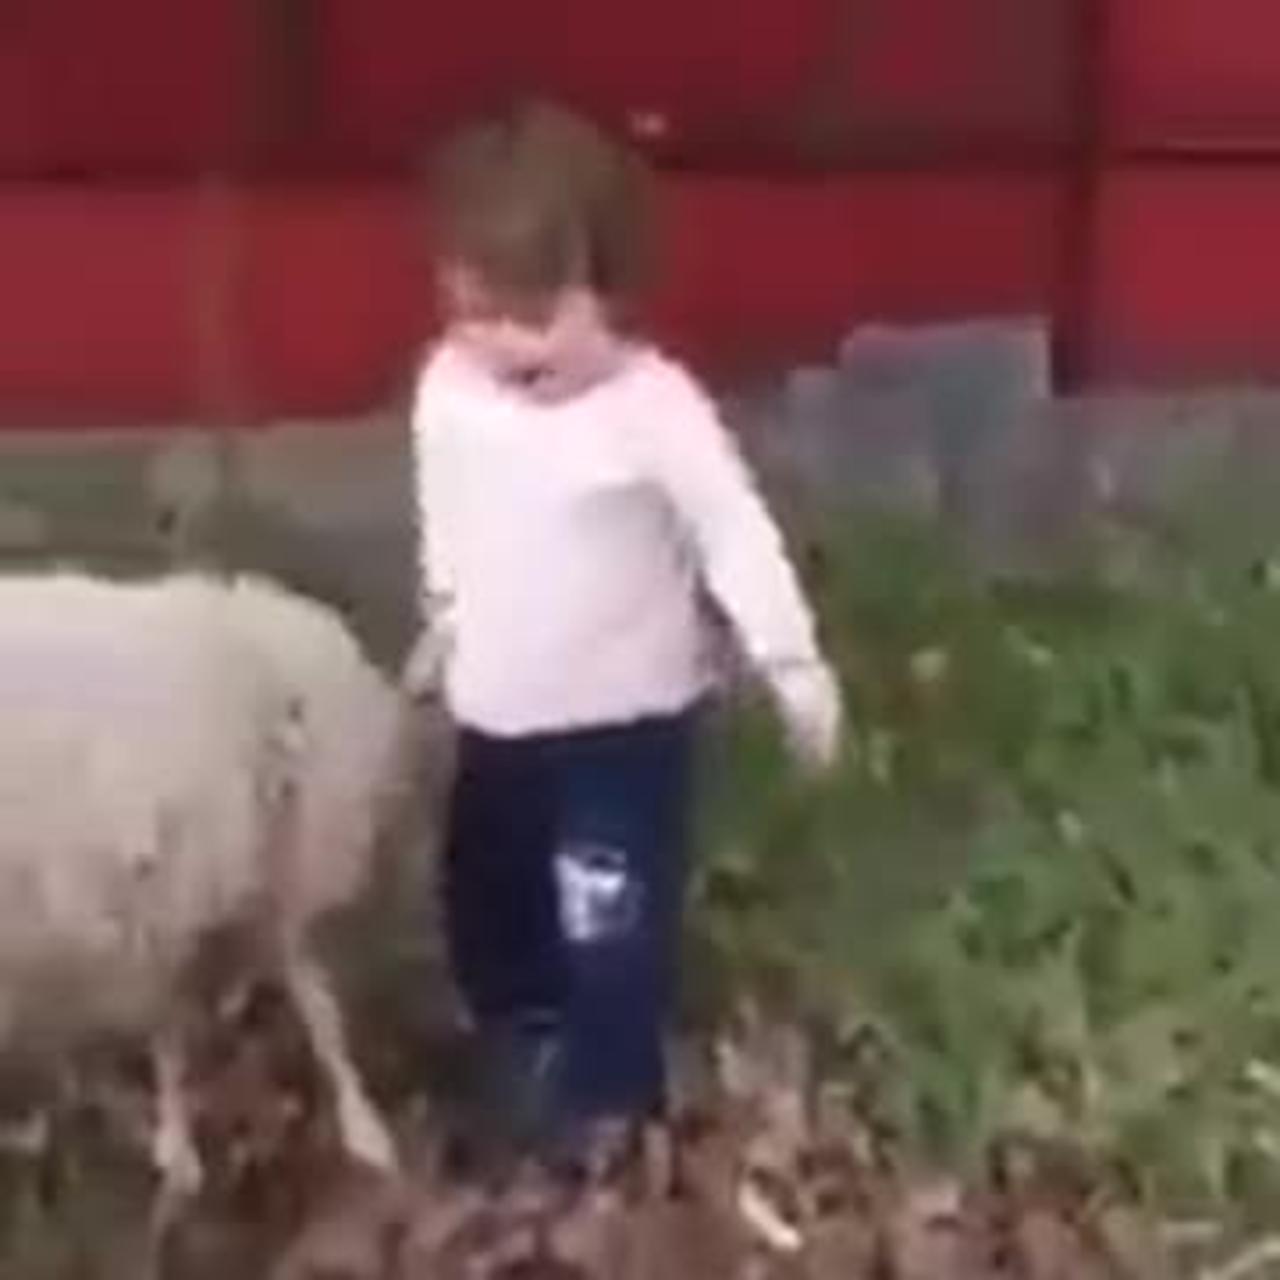 Cute baby playing with the Lamb😍😍😍